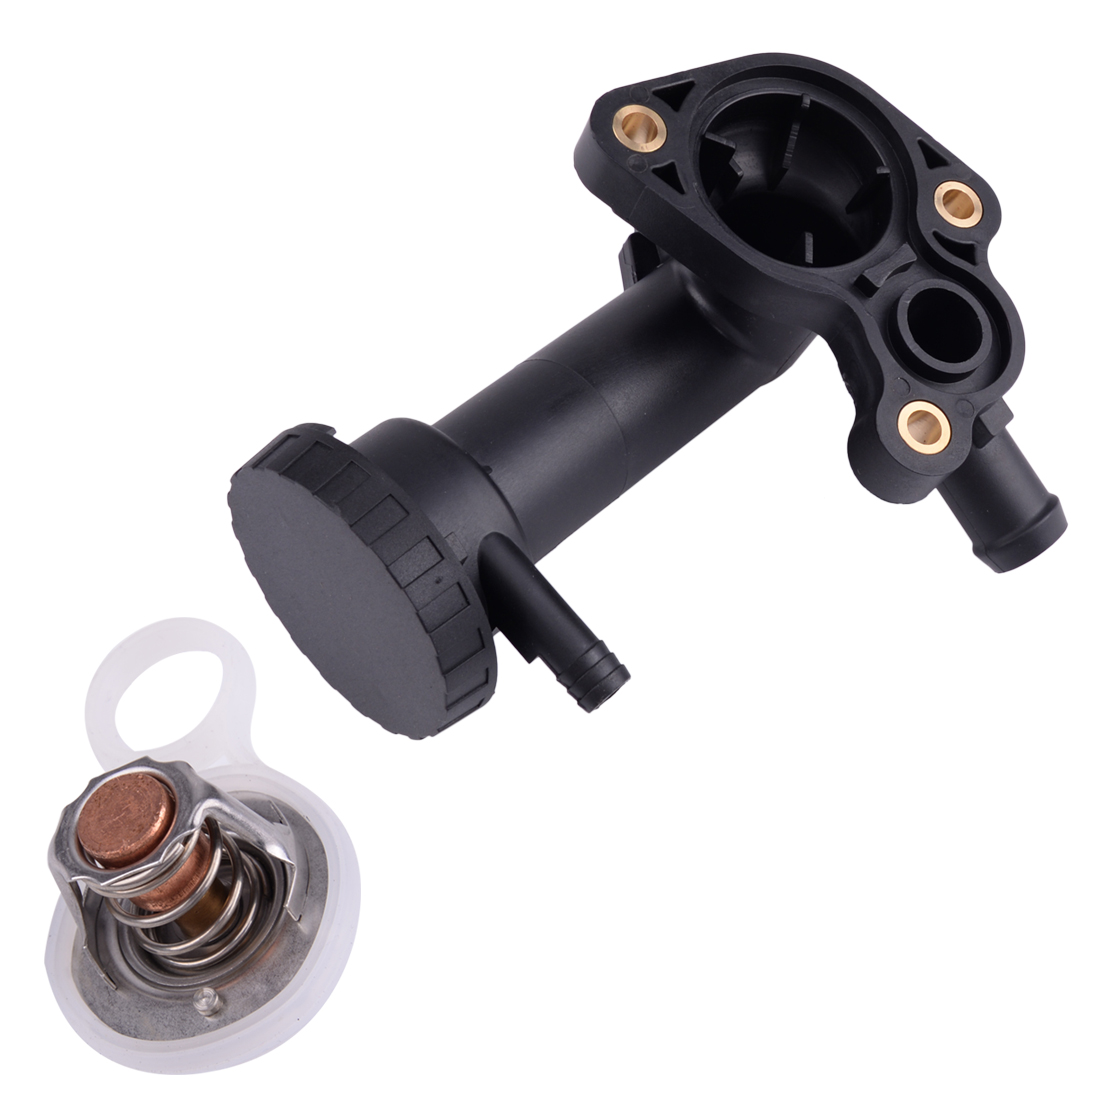 Car Engine Coolant Thermostat Housing Fit For Mini Cooper One R50 R53 R52 2001 2002 2003 2004 2005 2006 2007 11537829959